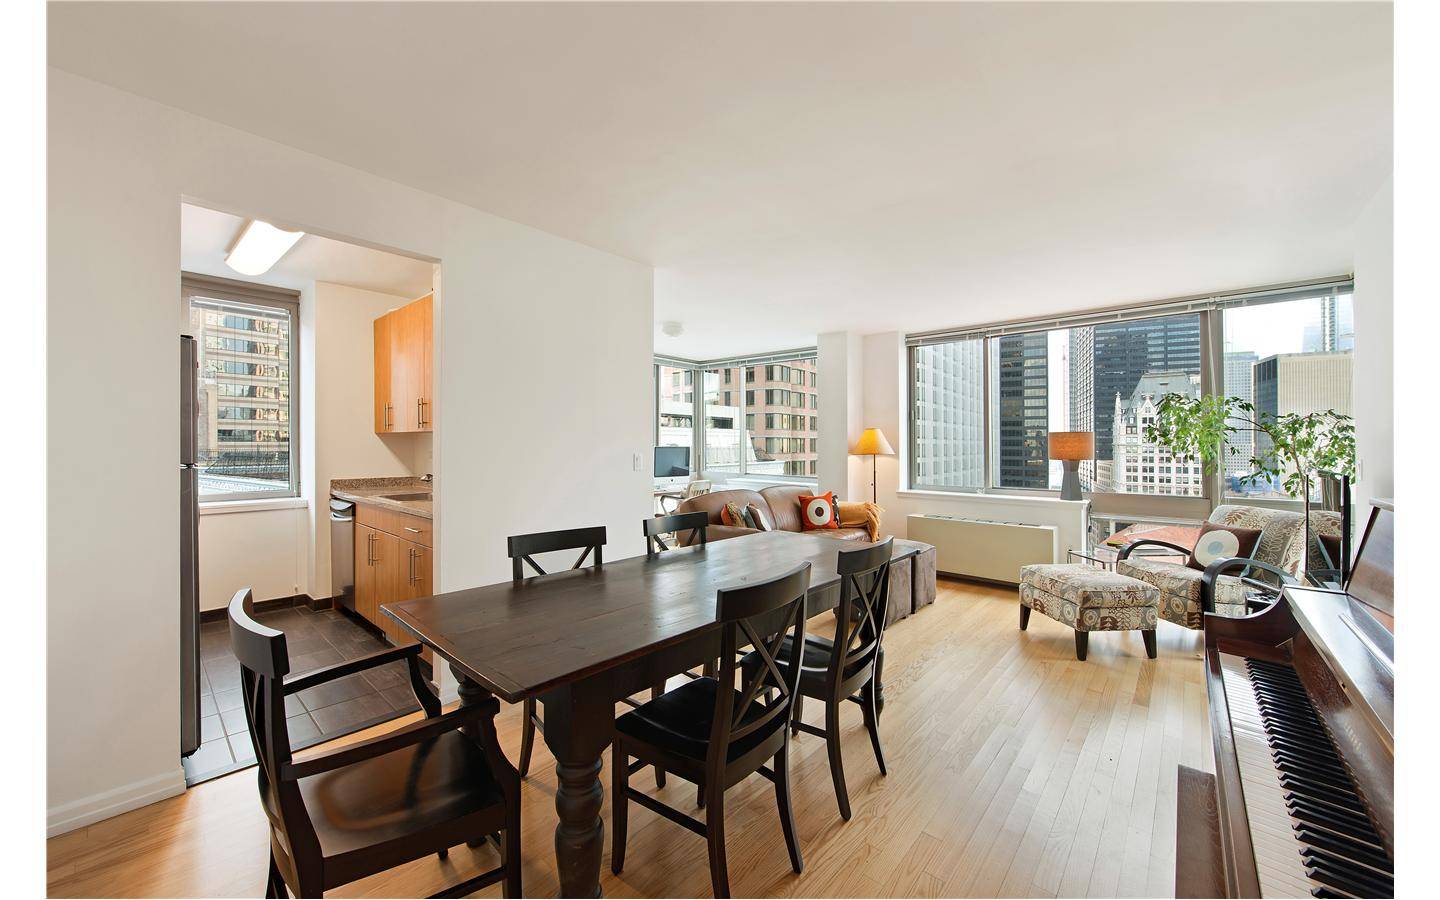 NO FEE!! GORGEOUS 3 BEDROOMS!! POOL, FITNESS CENTER, ROOF DECK!! FINANCIAL DISTRICT!!